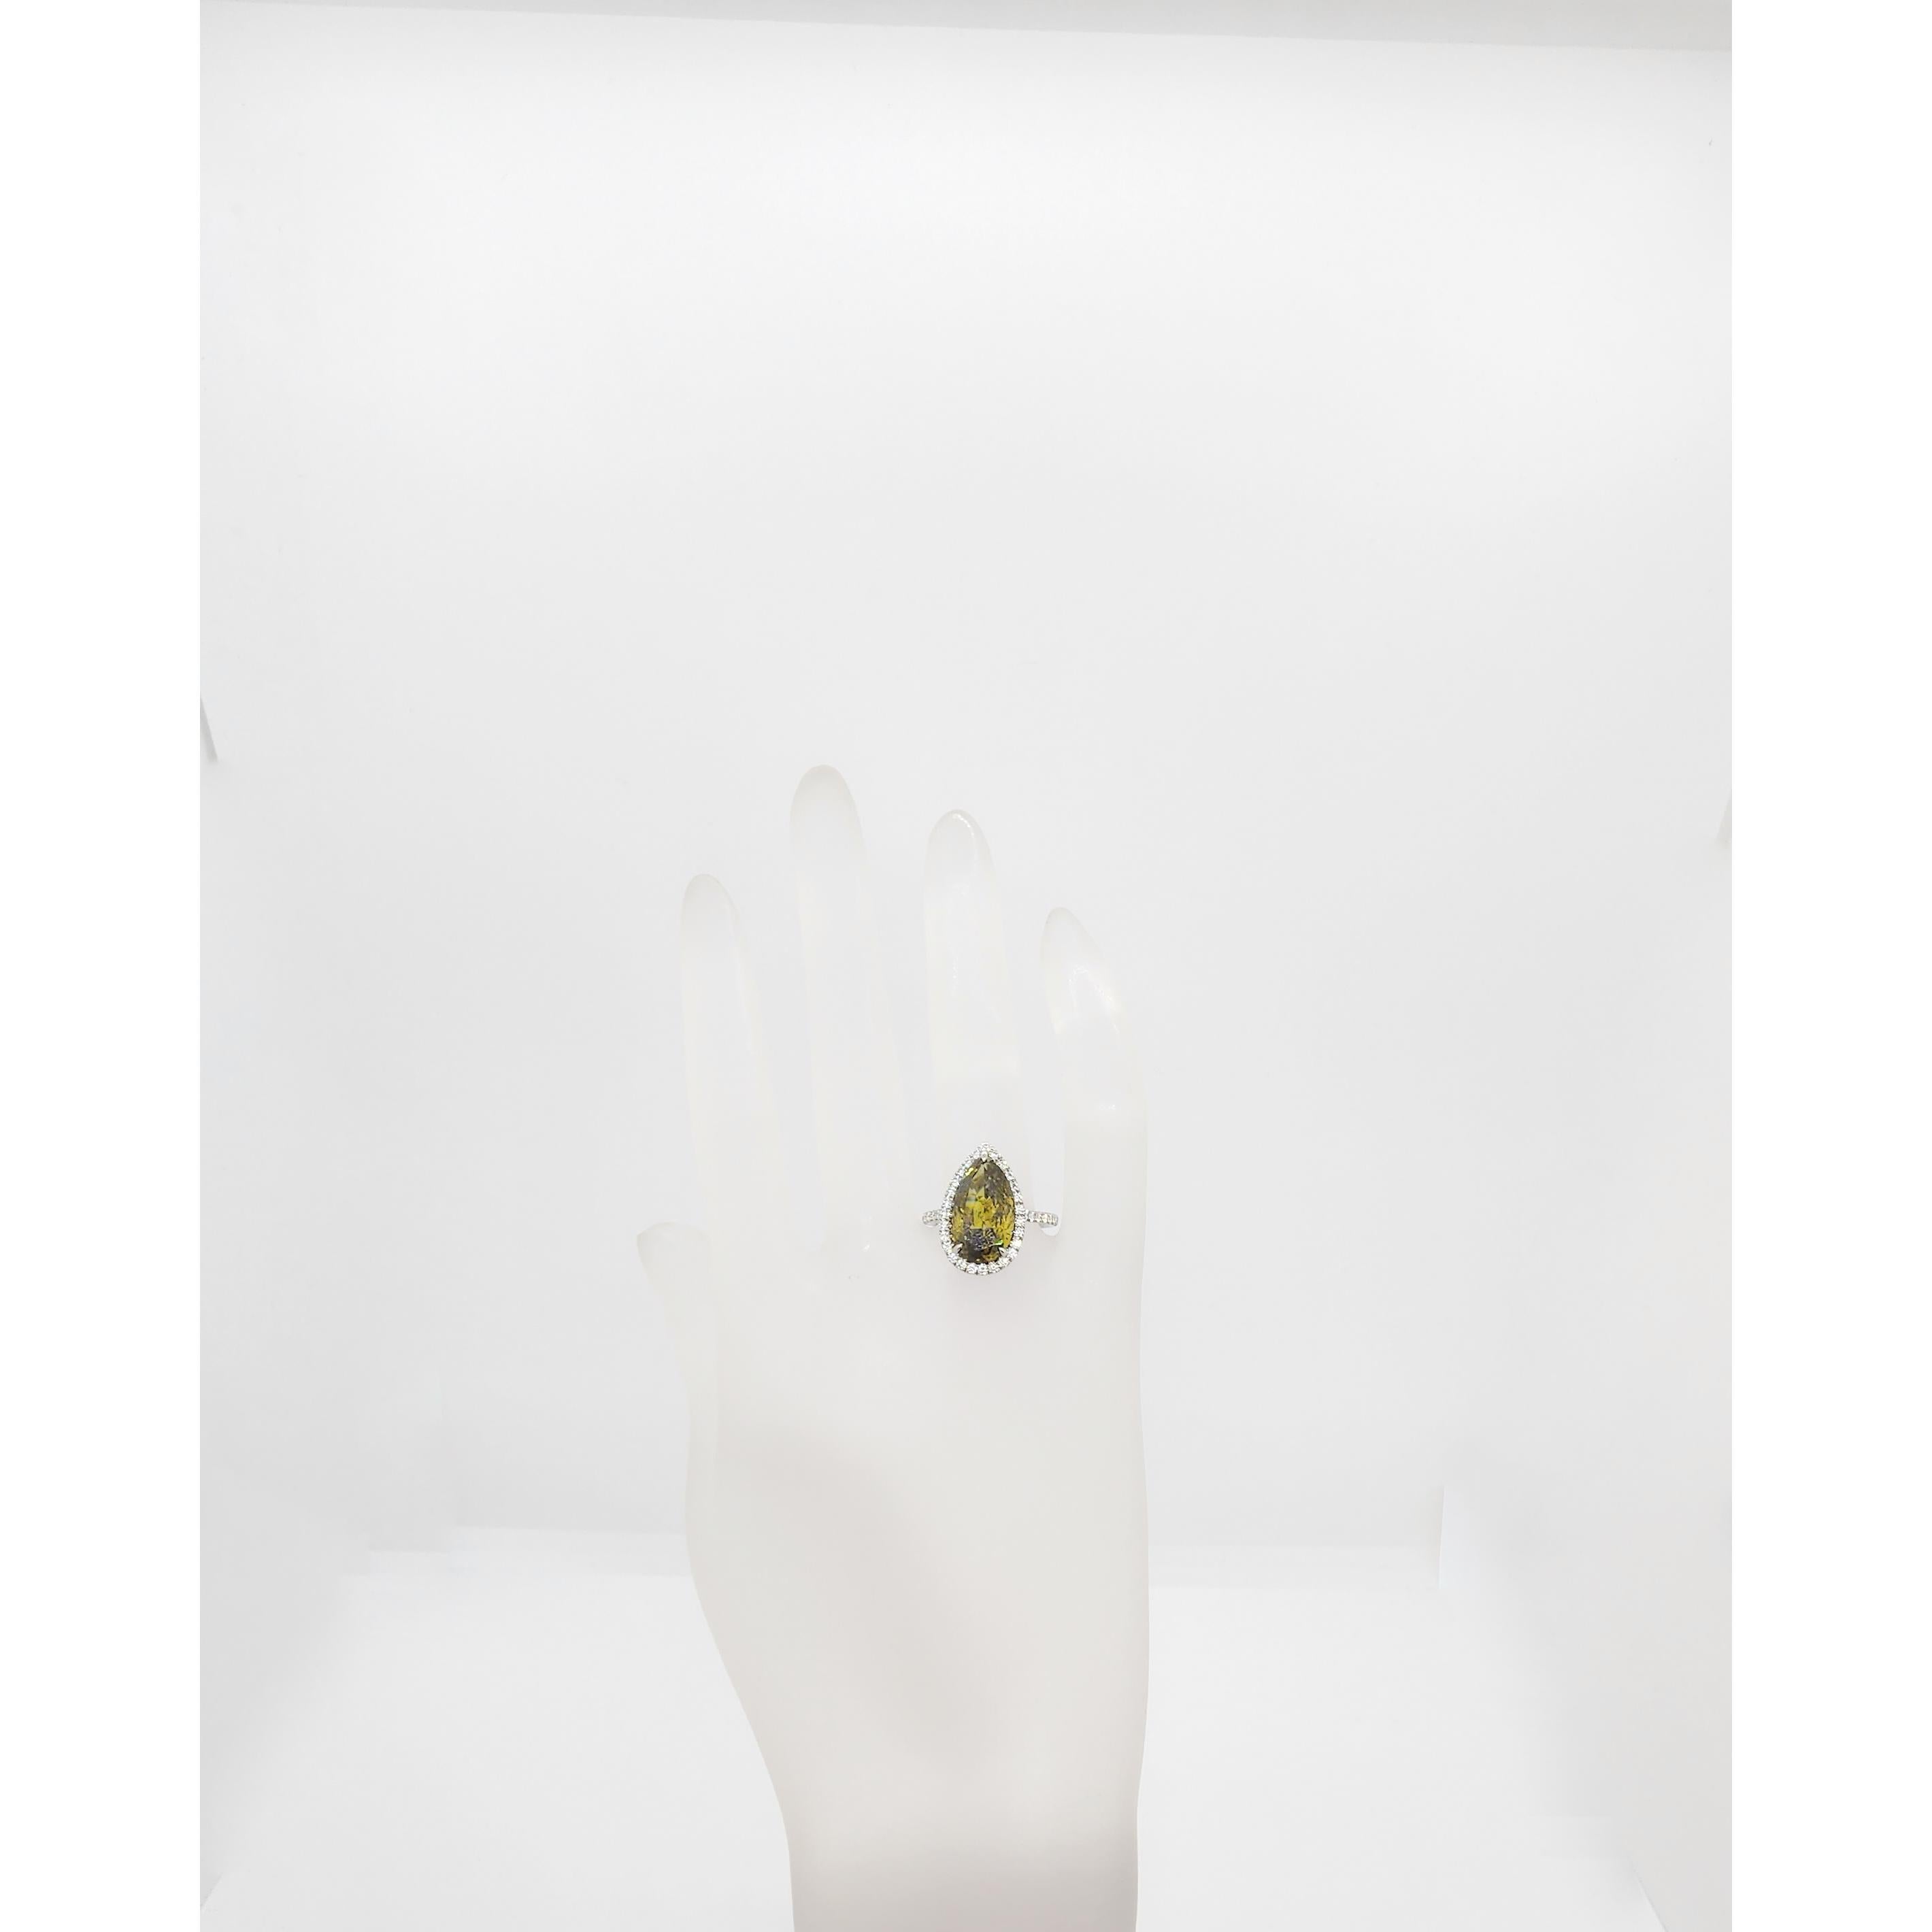 GIA Fancy Deep Brownish Greenish Yellow Pear Shape and White Diamond Ring For Sale 2